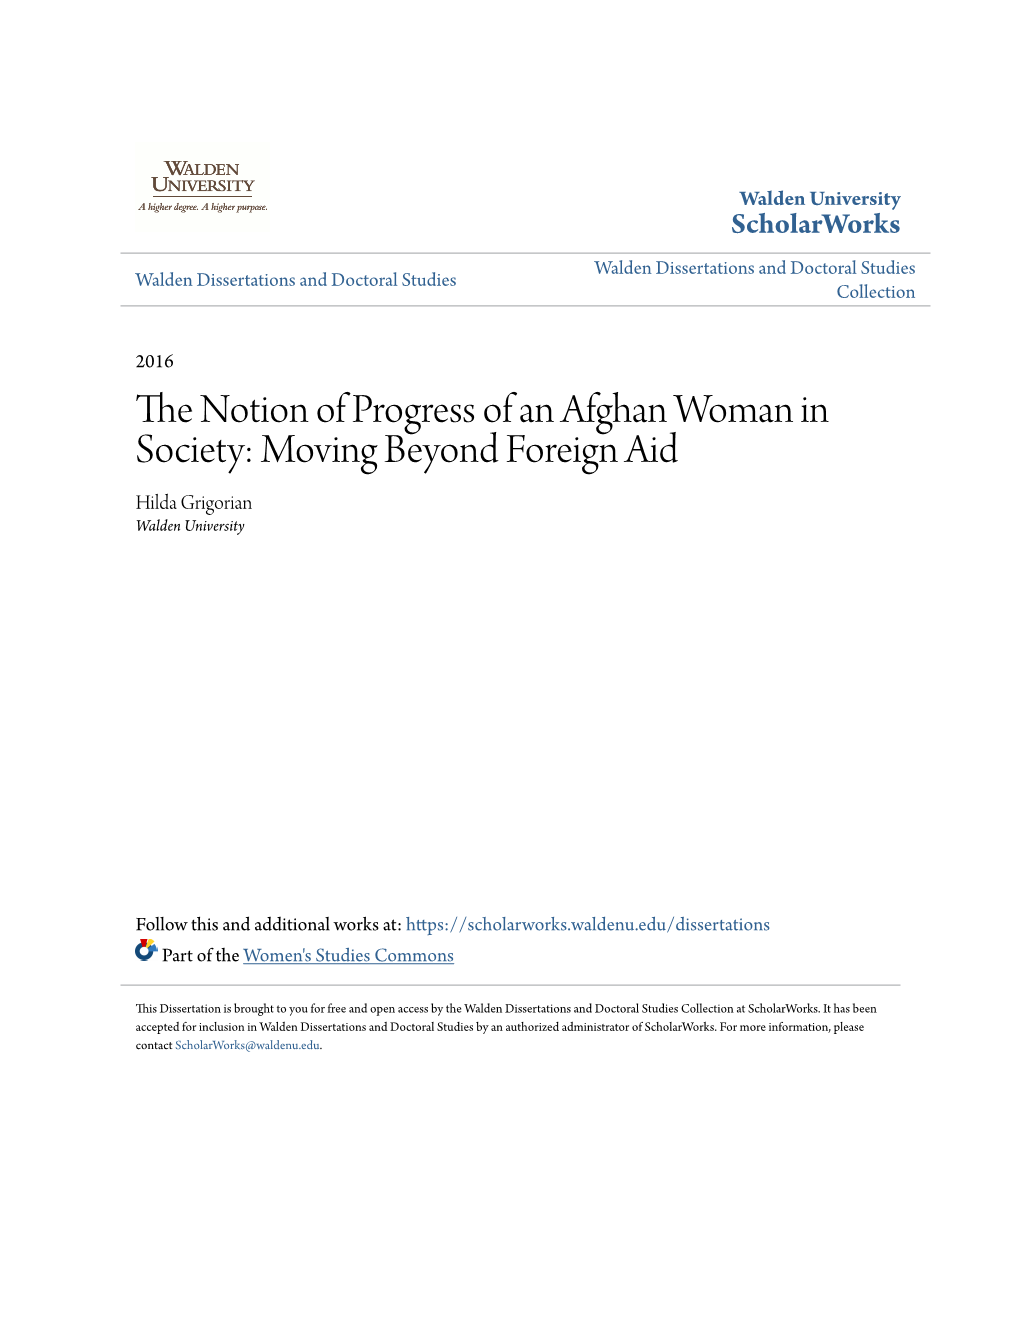 The Notion of Progress of an Afghan Woman in Society